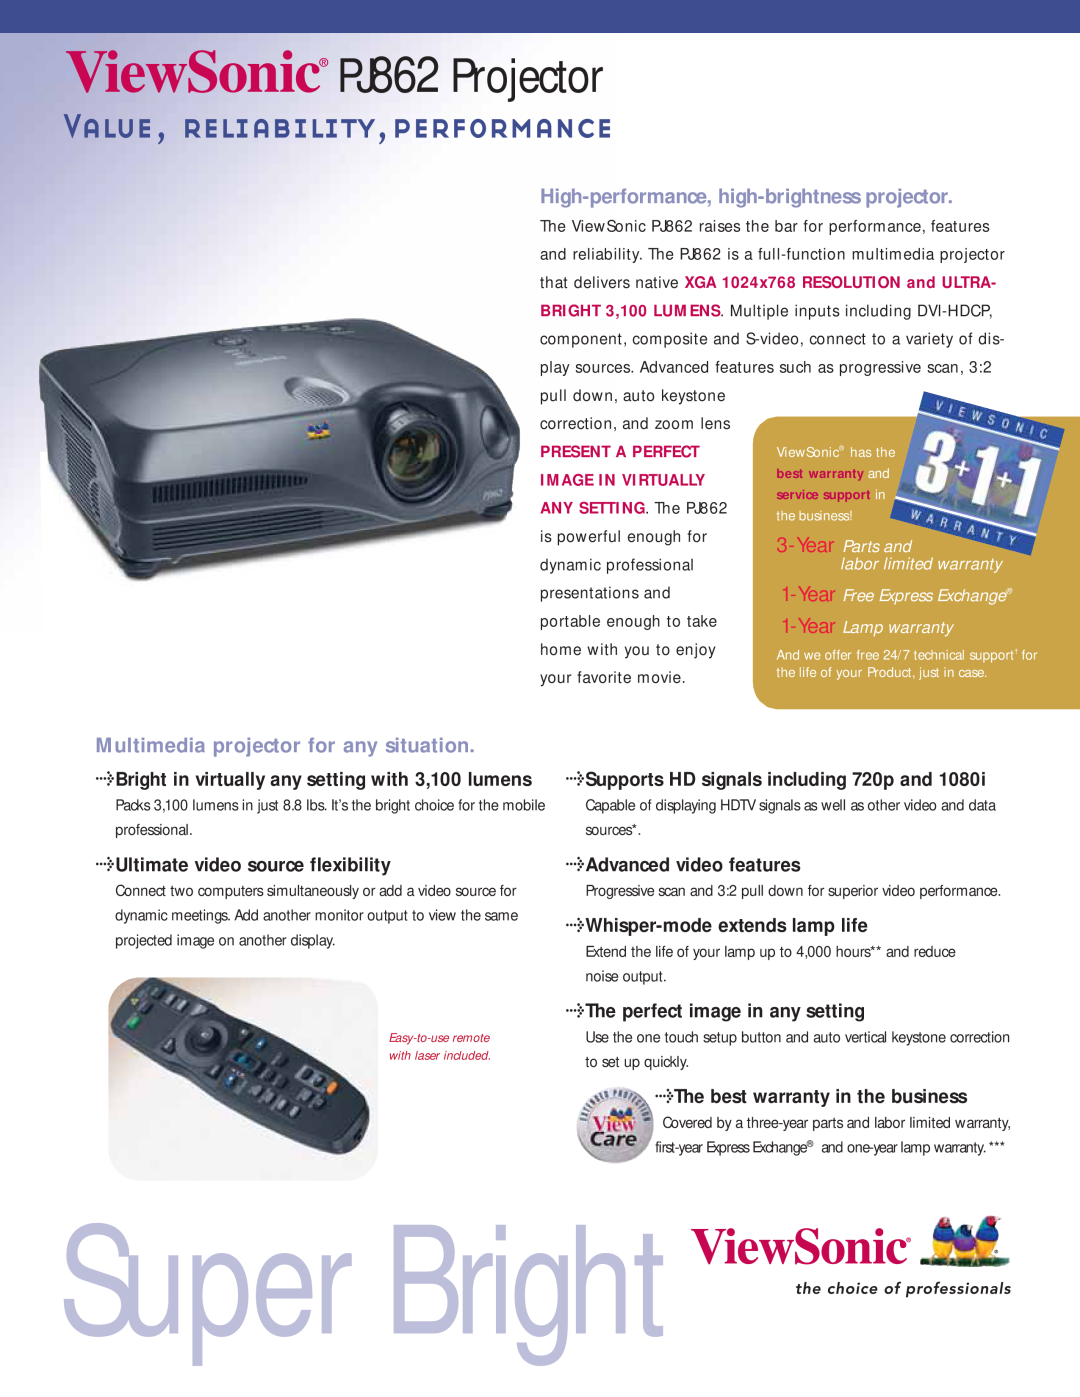 ViewSonic warranty PJ862 Projector, Value, reliability,performance, Ultimate video source flexibility, Super Bright 